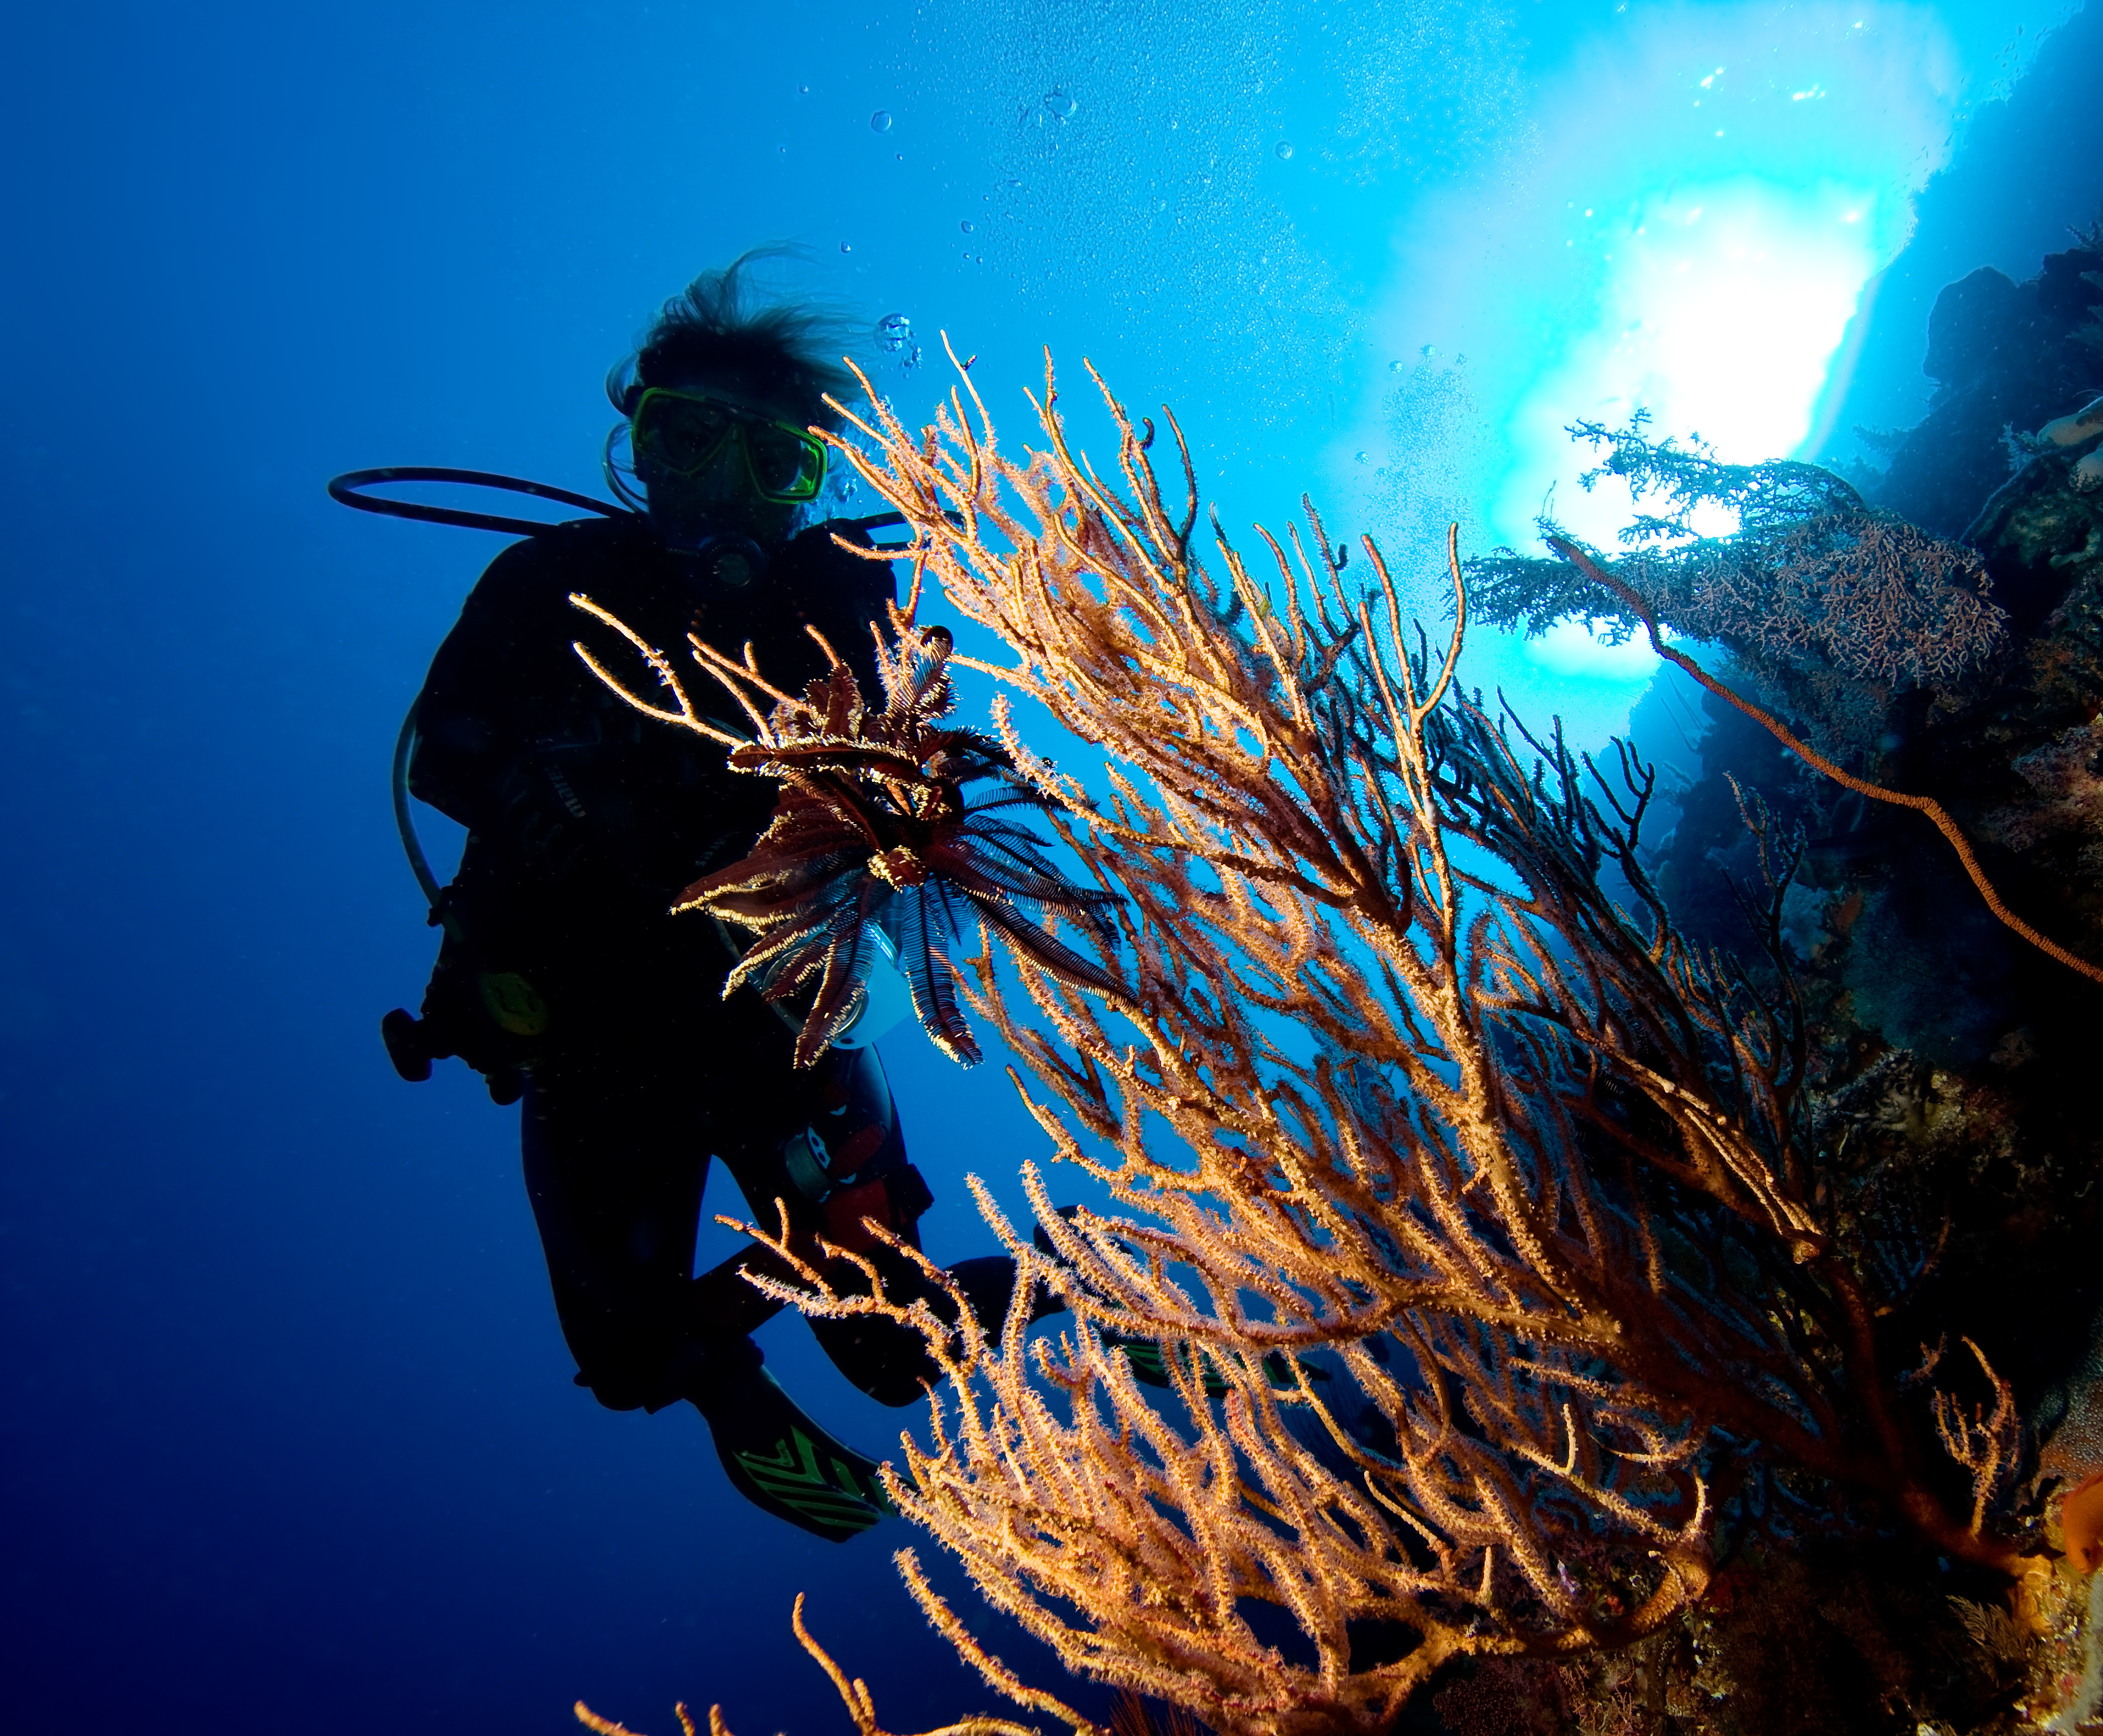 Experienced technical diver practices his solo diving skills while exploring the underwater world